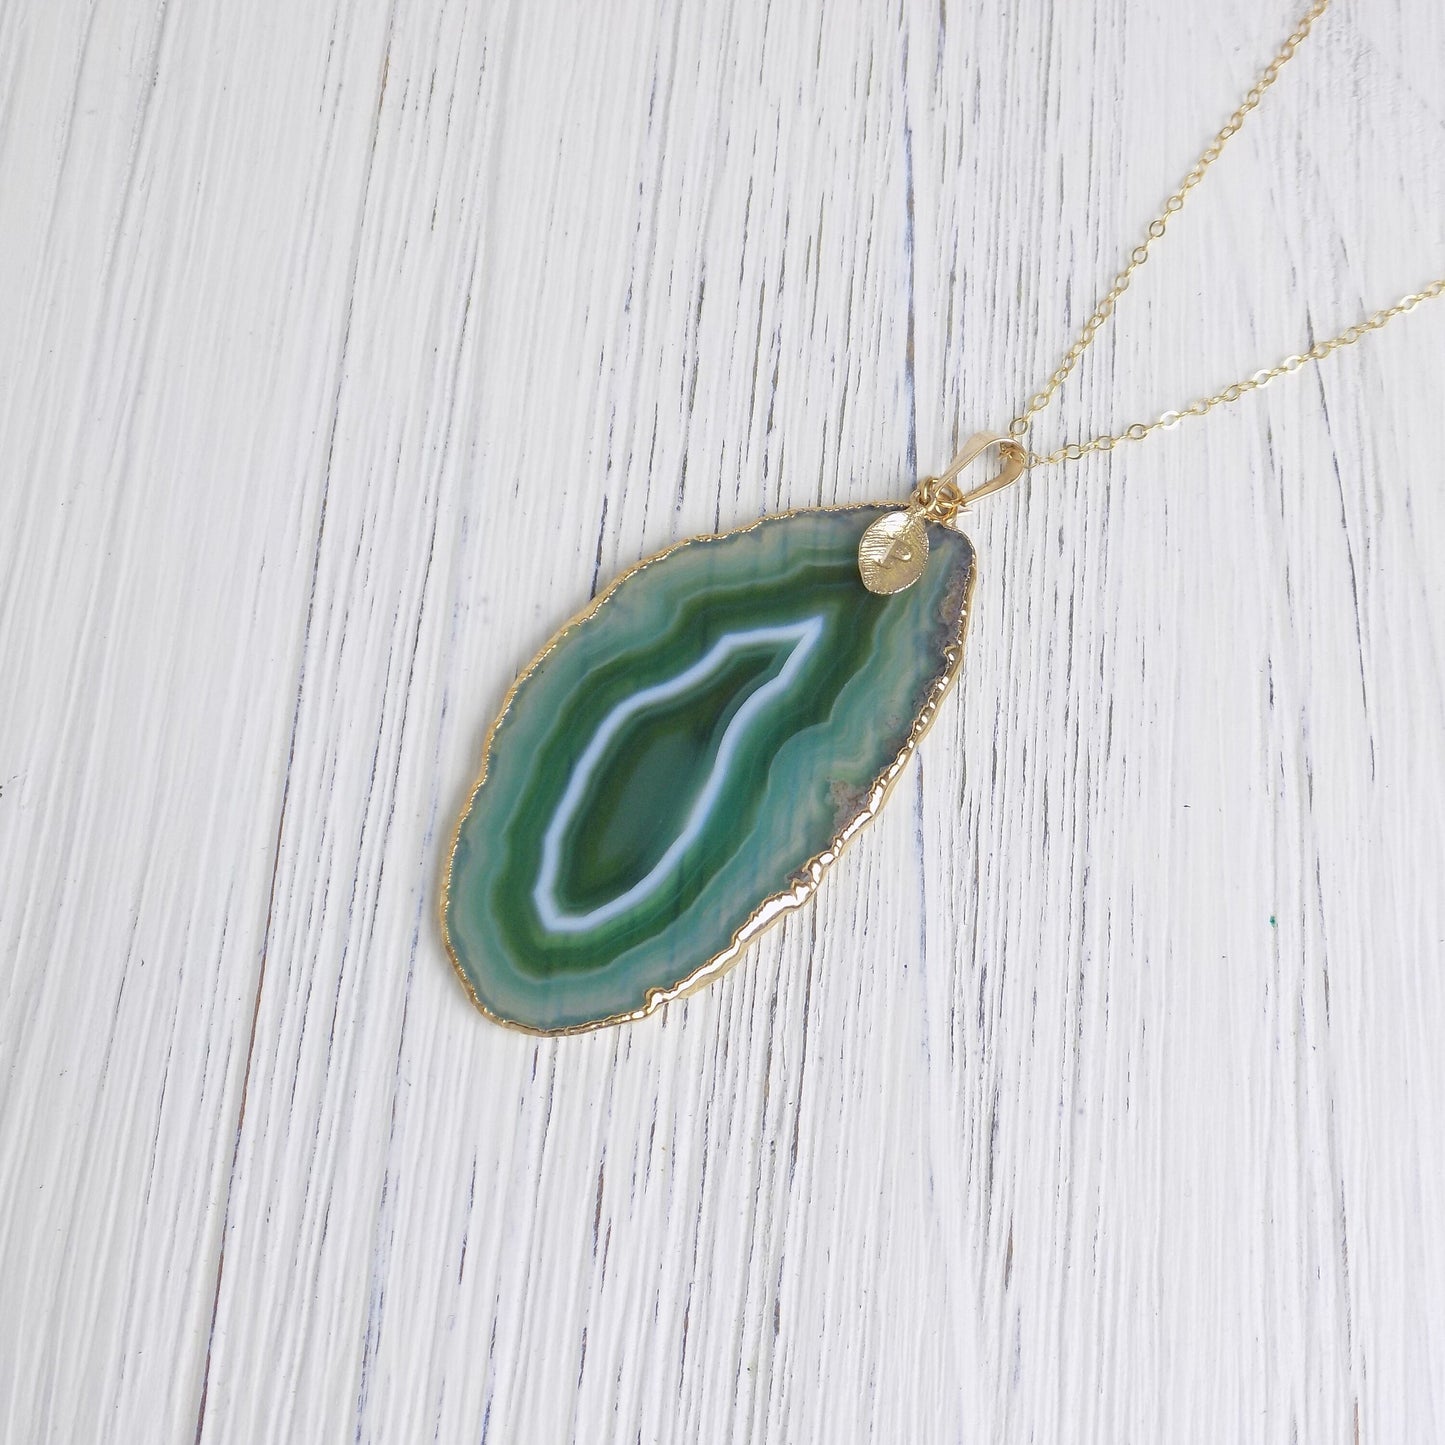 Boho Green Agate Slice Necklace, Gold Layer Statement Jewelry, Custom Initial, Mothers Day Gift, G14-274